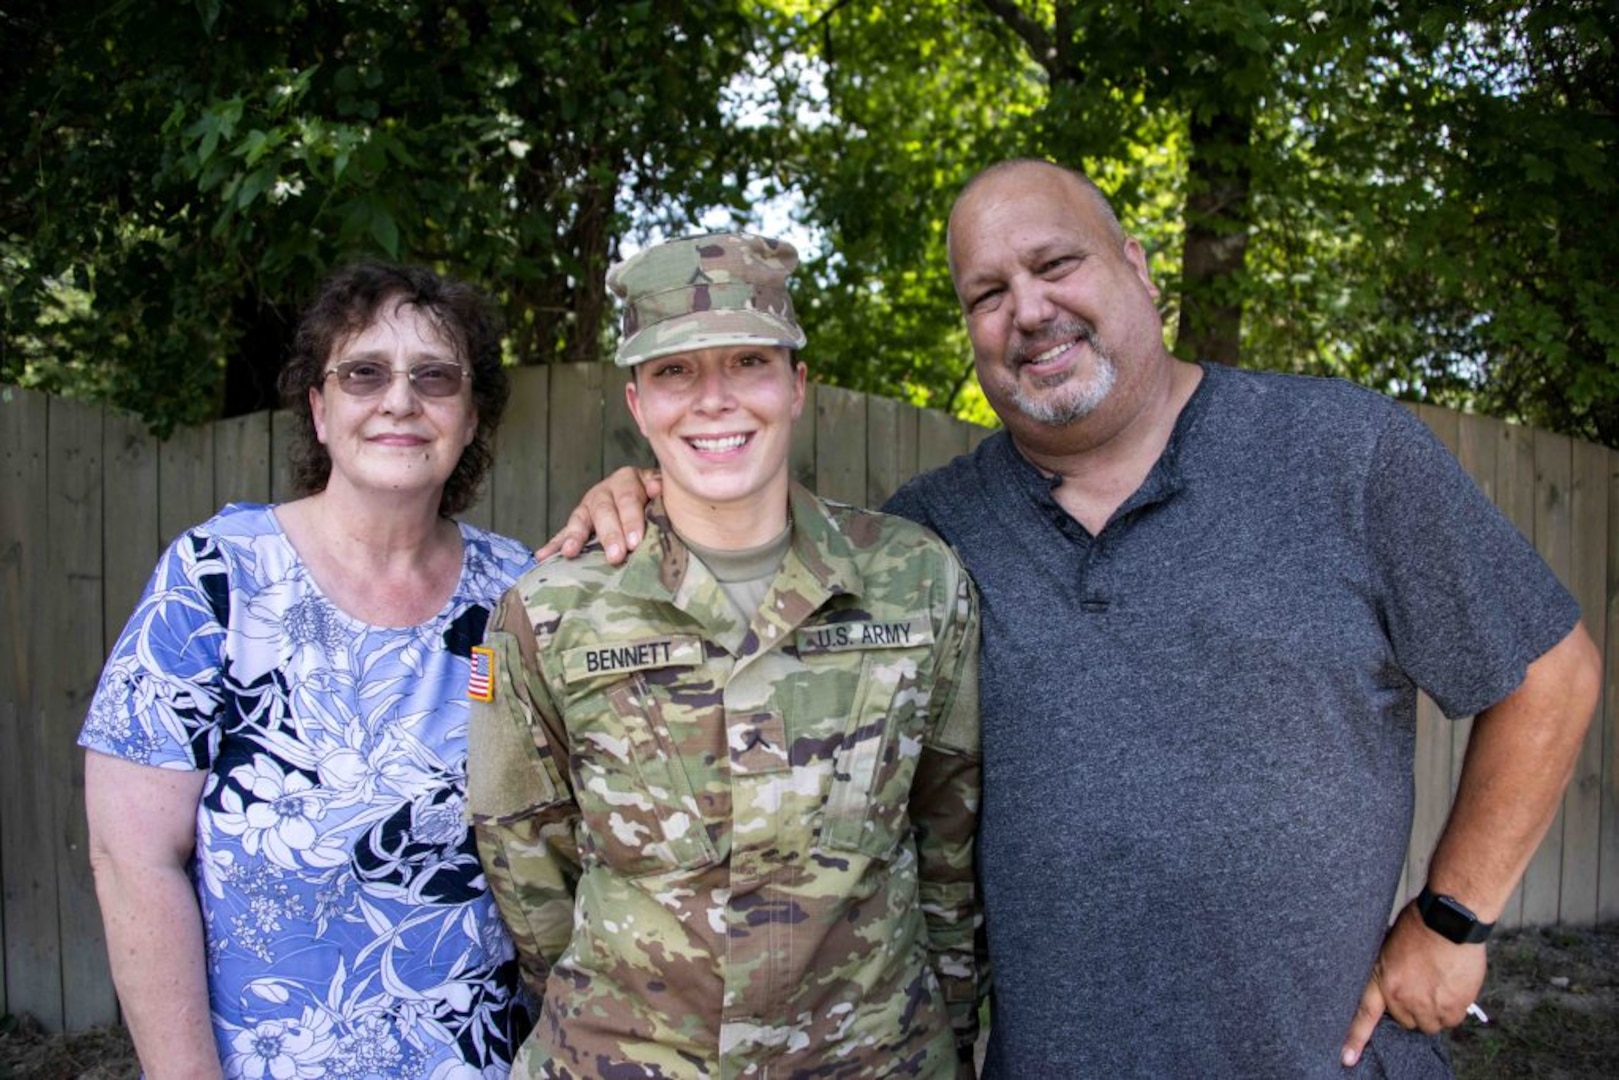 Pvt. Ana-Alicia Bennett poses for a photograph with her parents July 27, 2020, outside their home in Mechanicsville, Virginia.